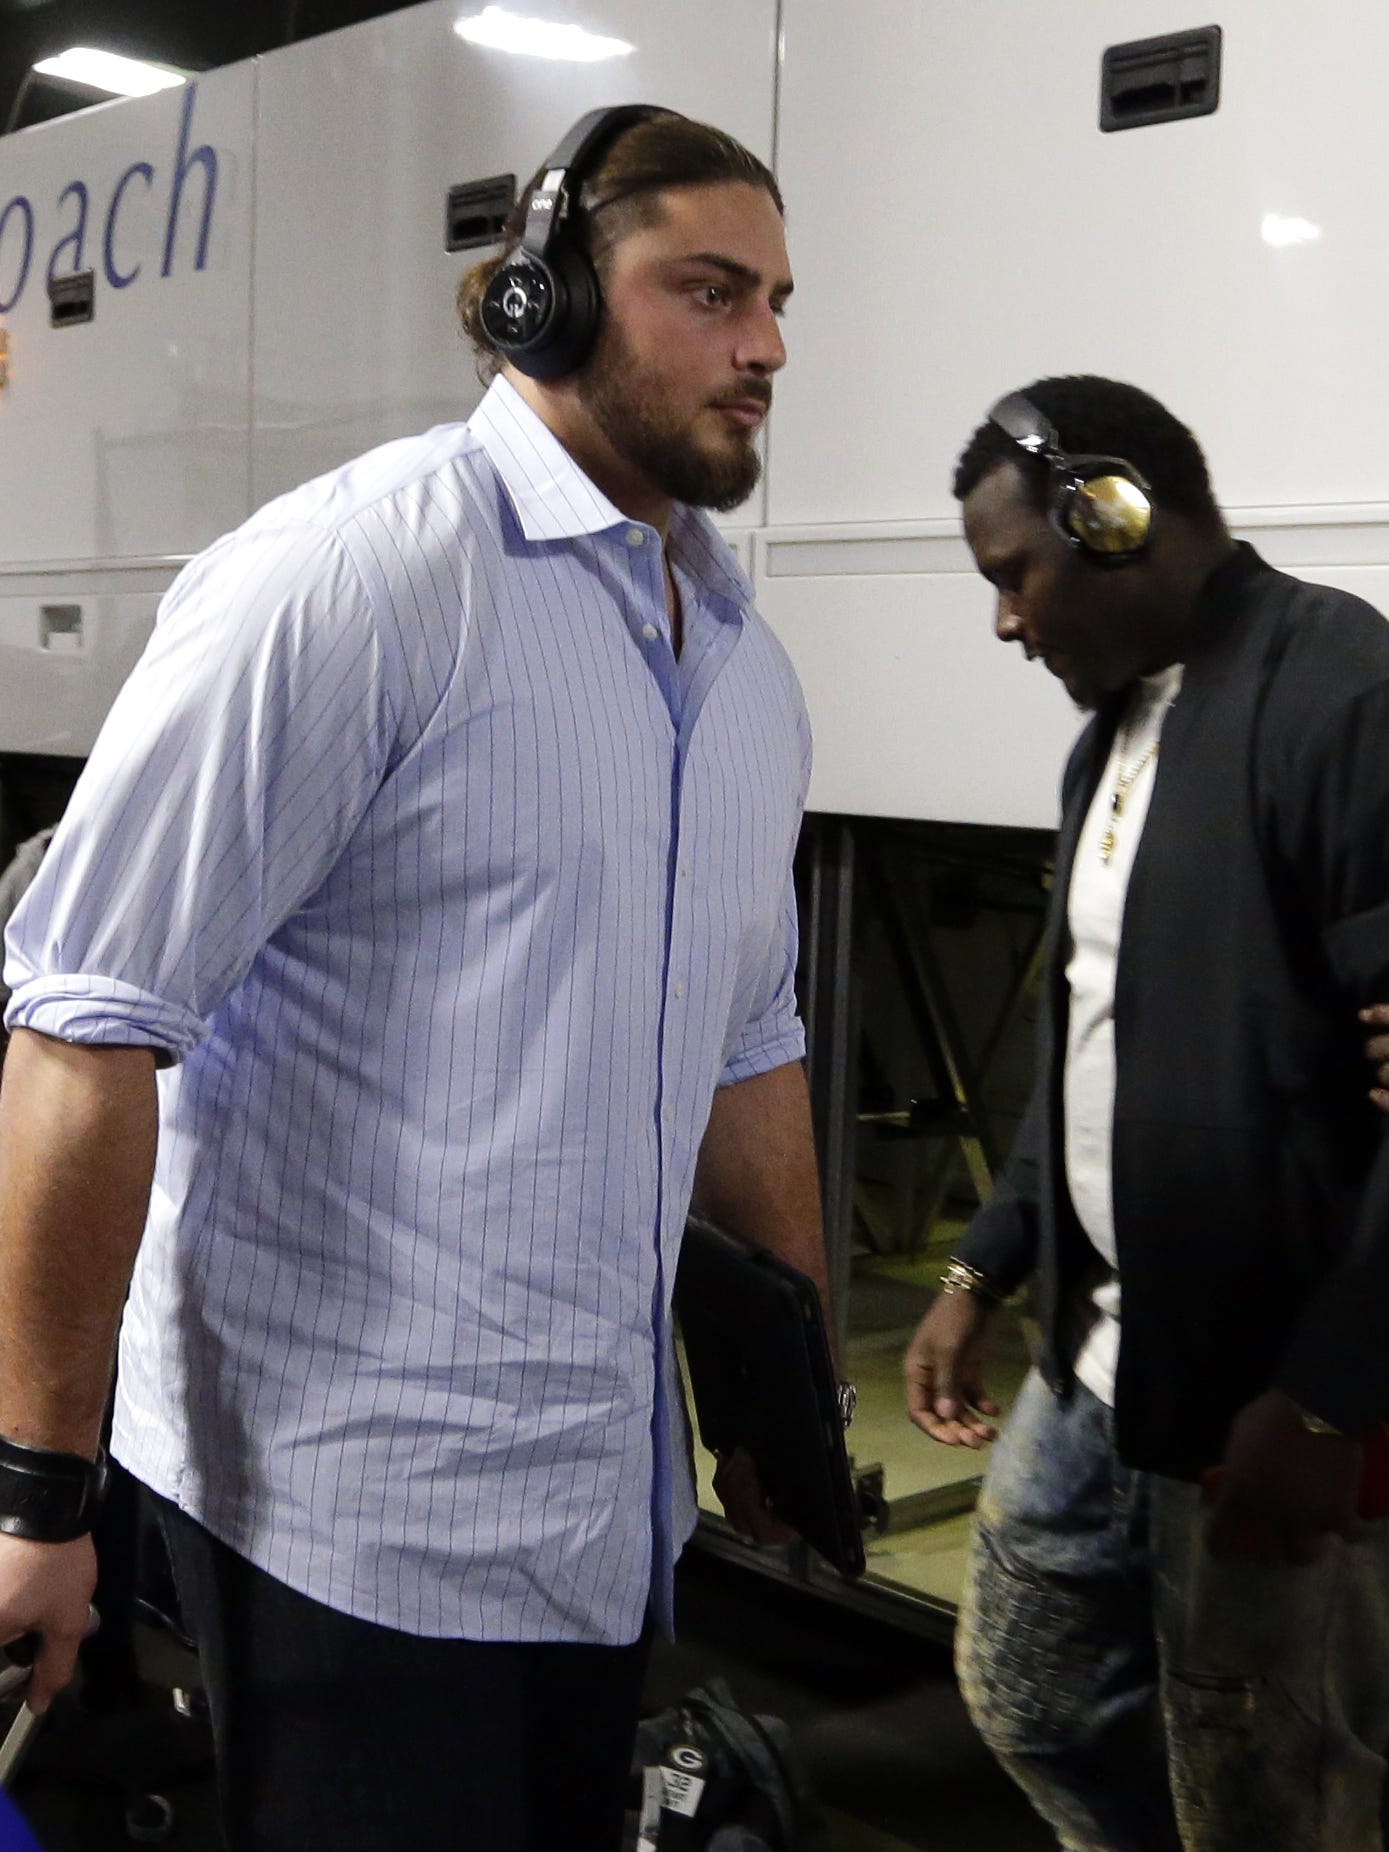 Green Bay Packers left tackle David Bakhtiari (69) gets off the team bus before the game against the Atlanta Falcons on Sept. 17, 2017, at Mercedes Benz Stadium in Atlanta.